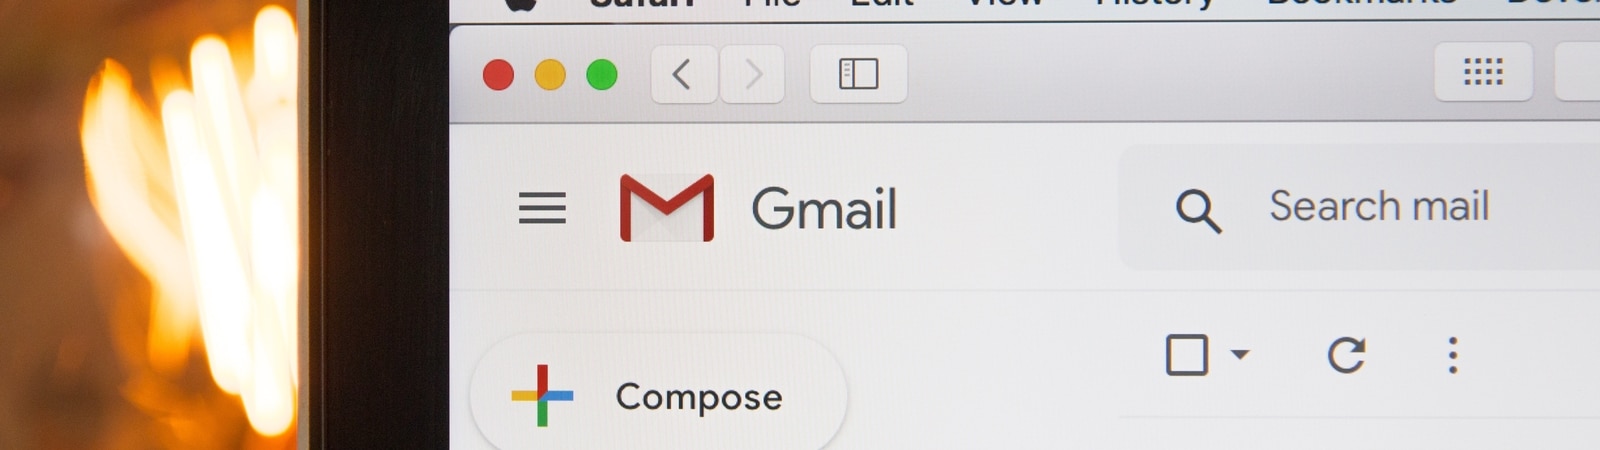 Gmail email interface